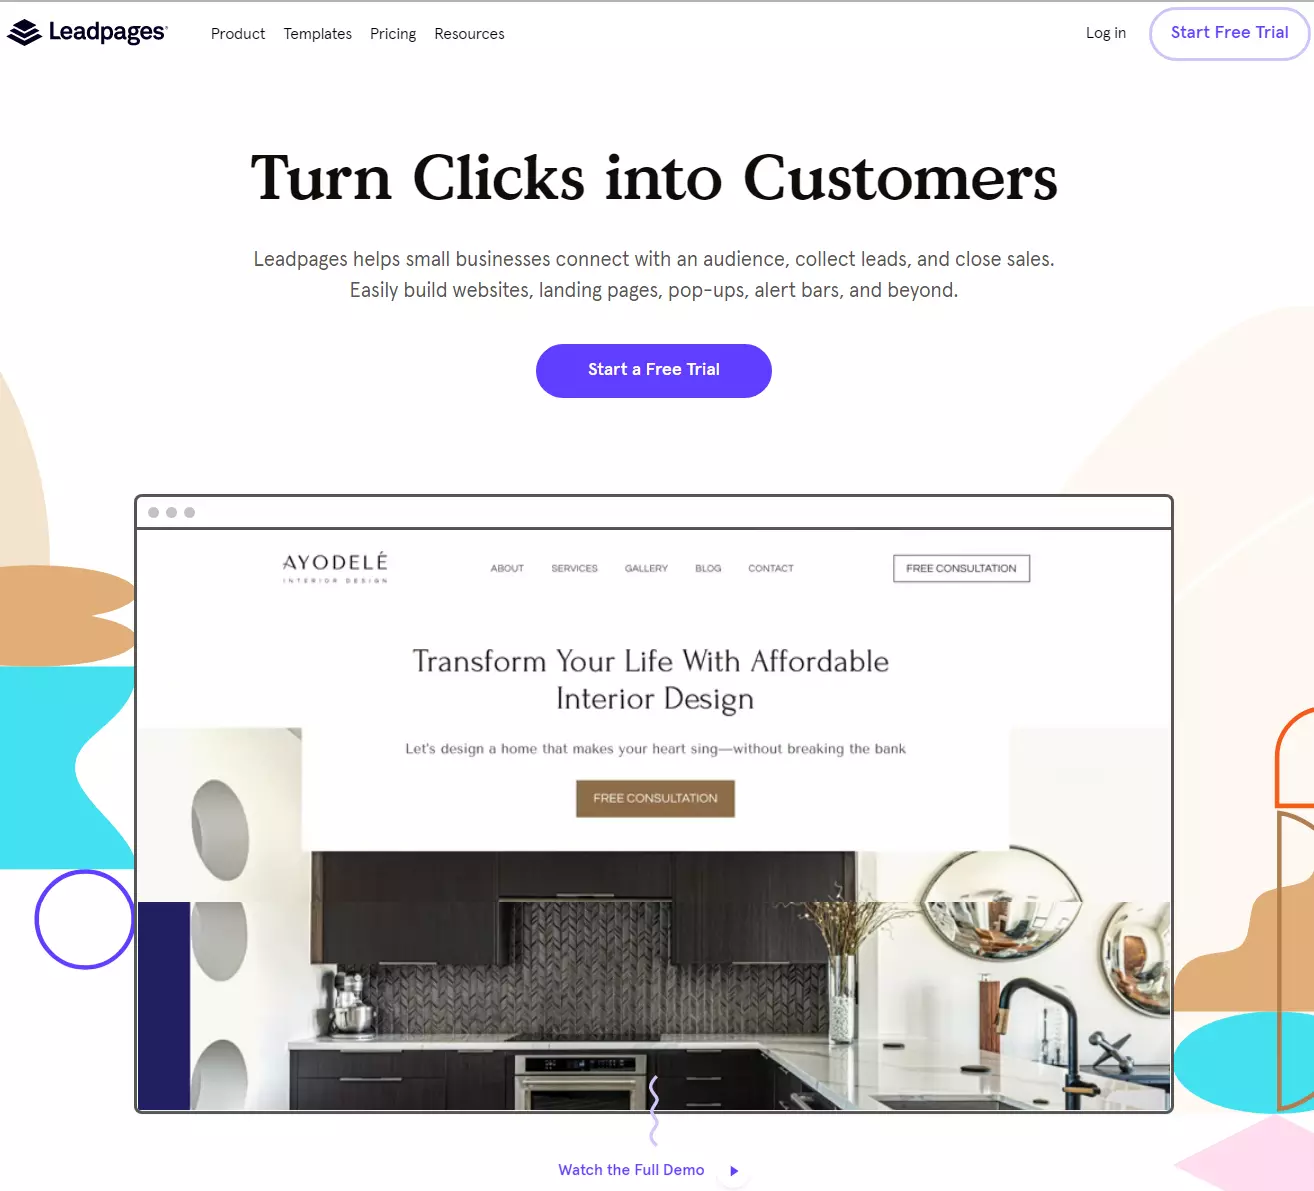 Leadpages-Website-Landing-Page-Software-Small-Businesses